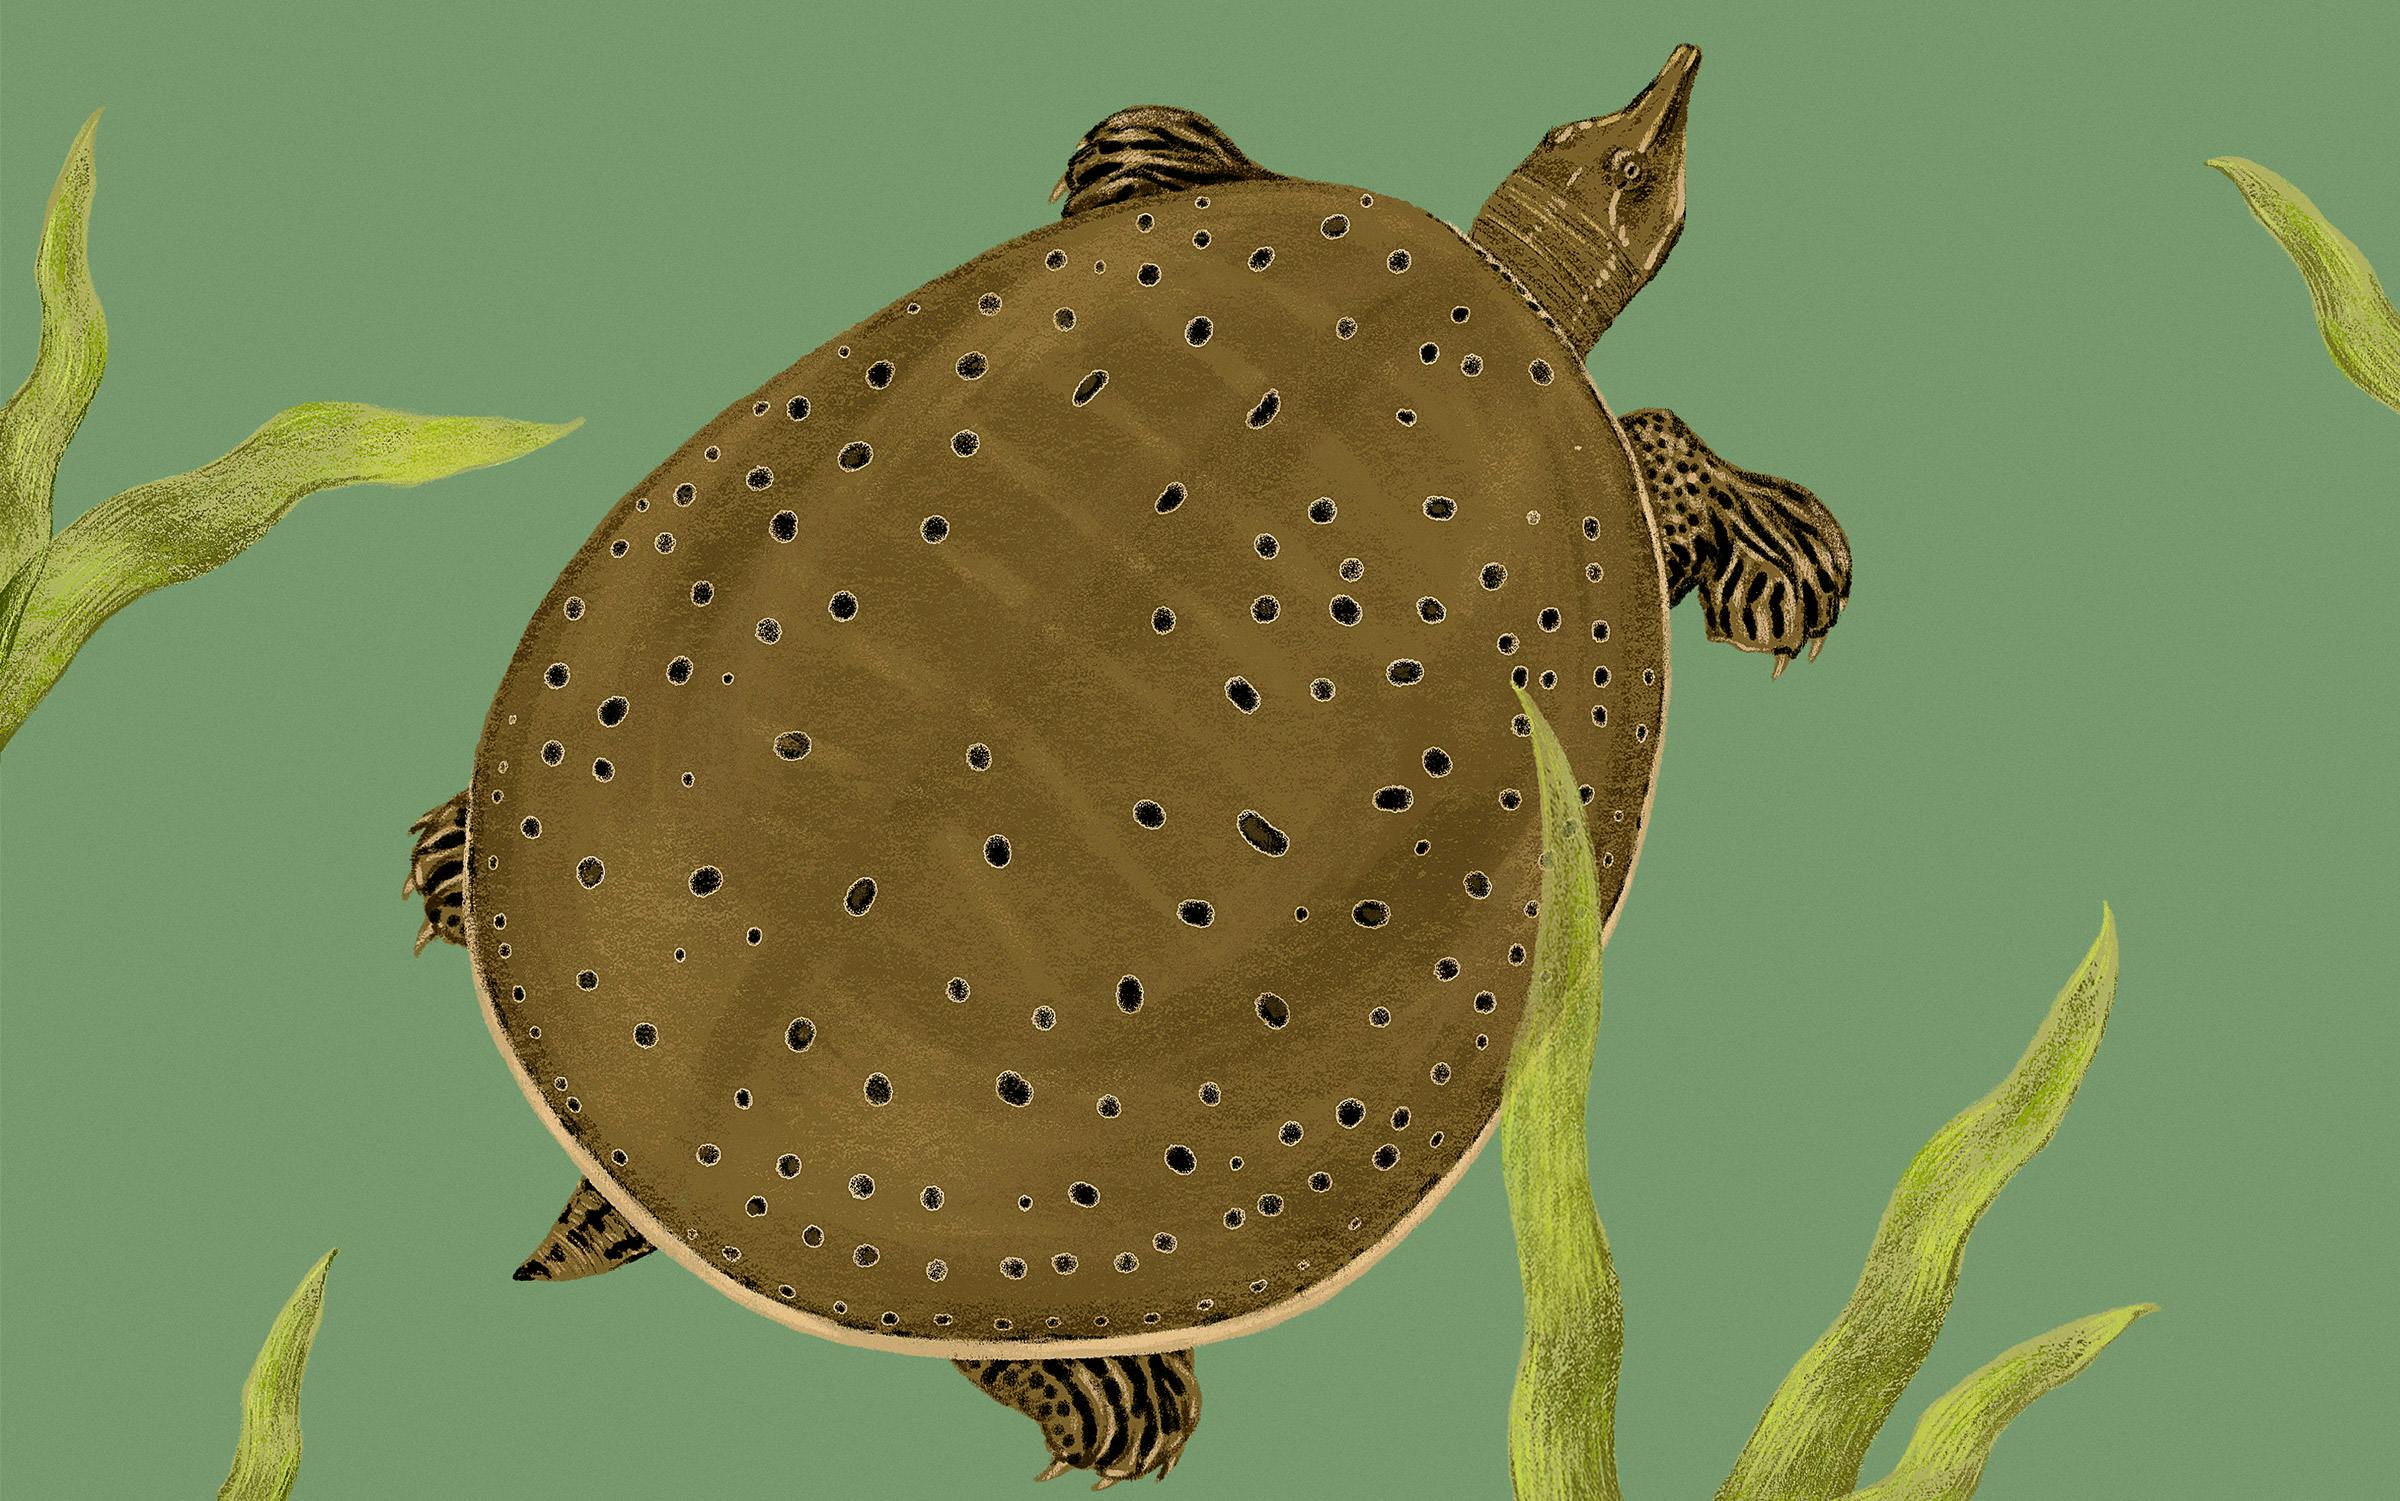 https://img.texasmonthly.com/2023/09/spiny-softshell-turtle.jpg?auto=compress&crop=faces&fit=fit&fm=pjpg&ixlib=php-3.3.1&q=45